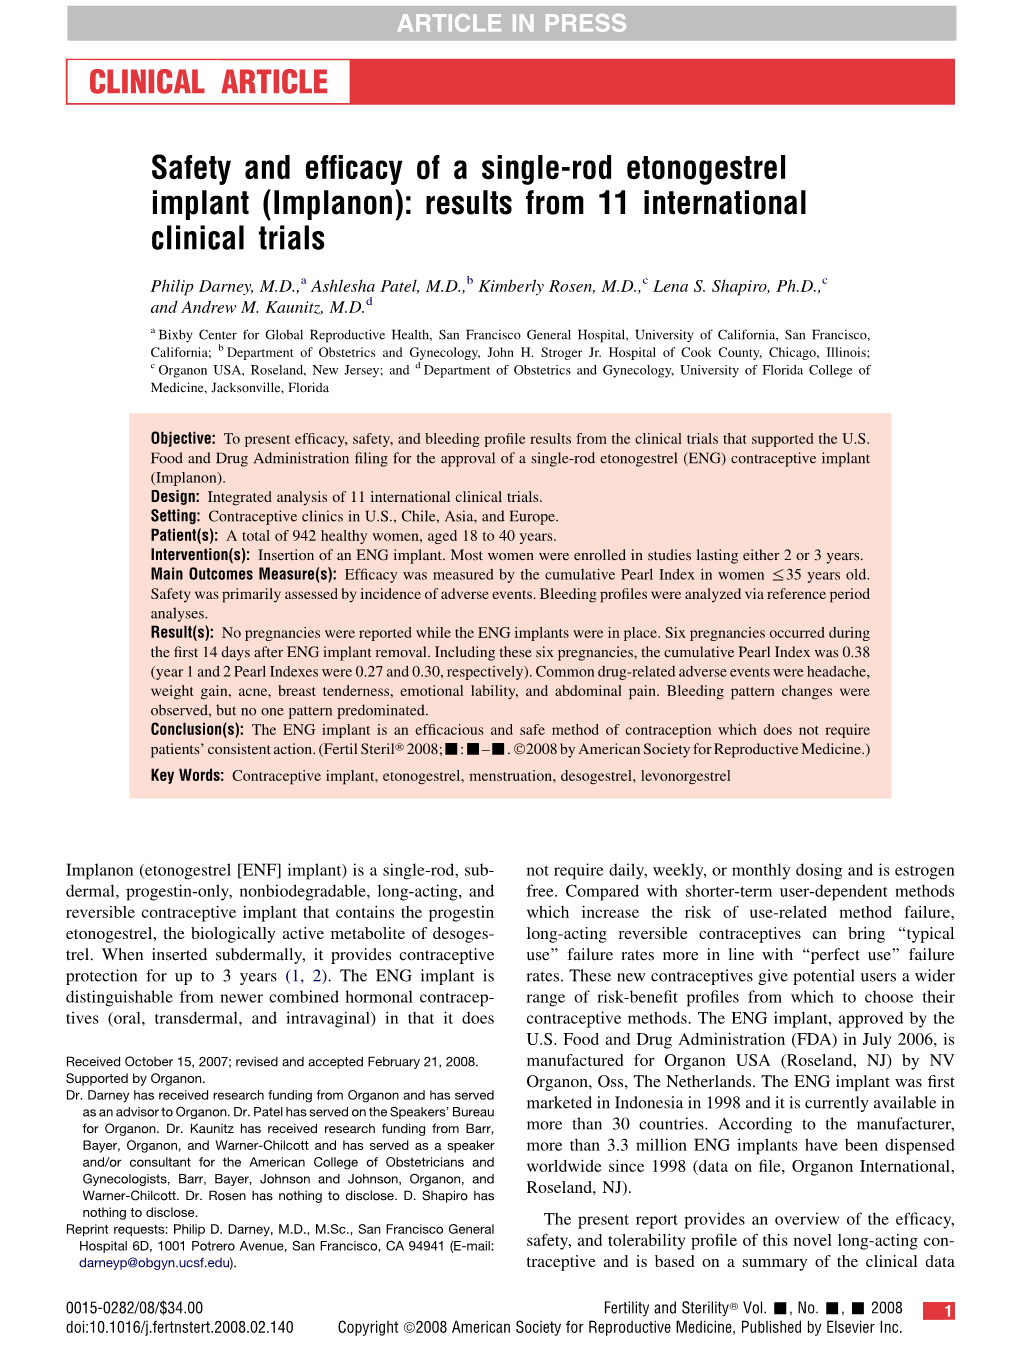 Implanon): Results from 11 International Clinical Trials